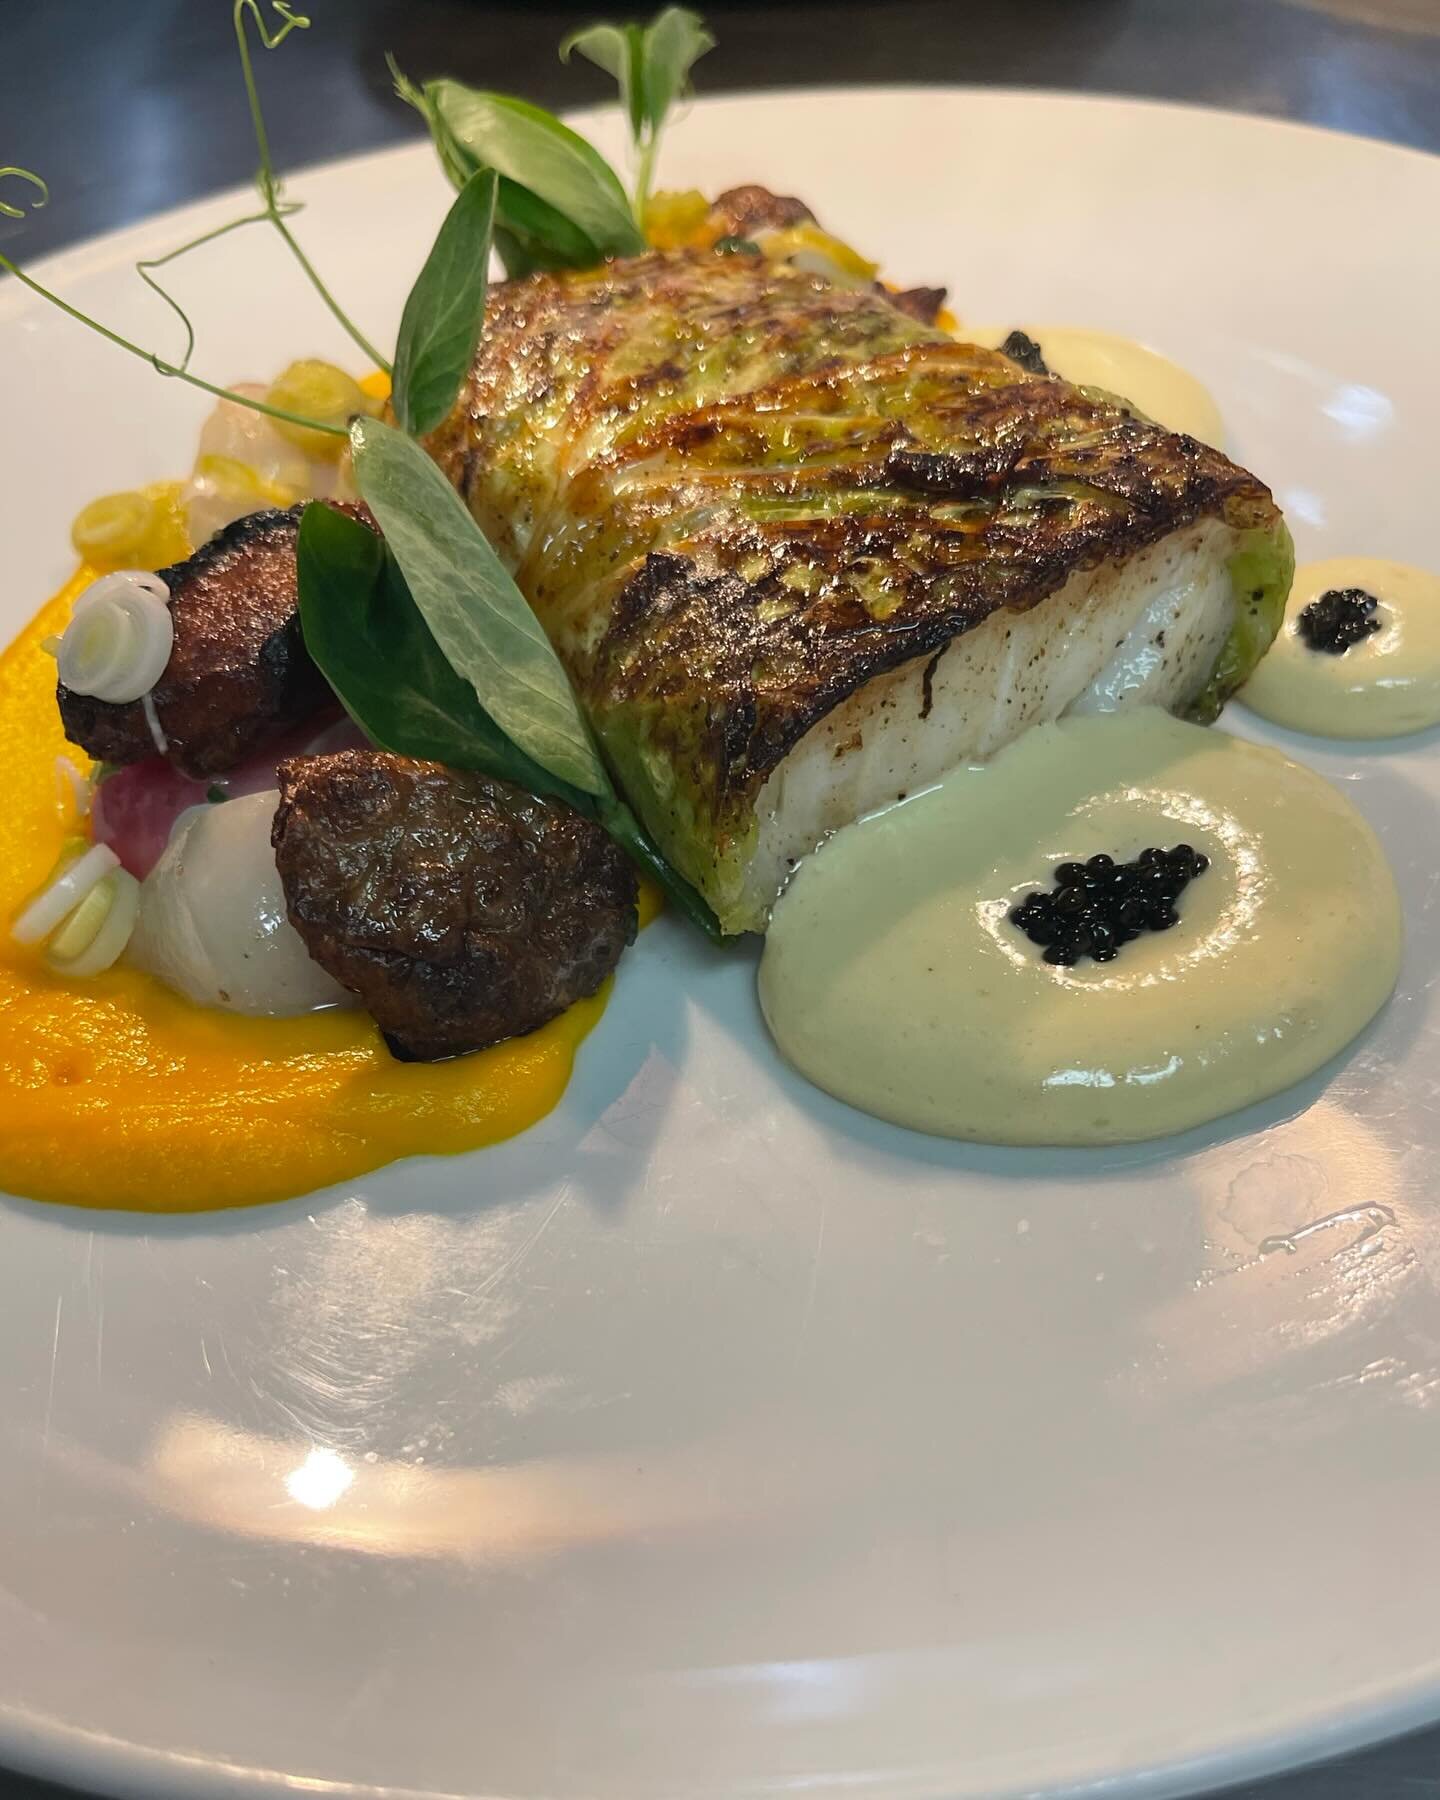 Savoy Cabbage Wrapped Icelandic Cod: Brown Butter Roasted, Nantes Carrot Puree, French Breakfast Radish, Turnip, Sunchoke, Pickled Green Garlic, Pea Tendril, White Sturgeon Caviar and Brown Butter Velout&eacute; Espuma. #bestseatsintown #since1944 #r